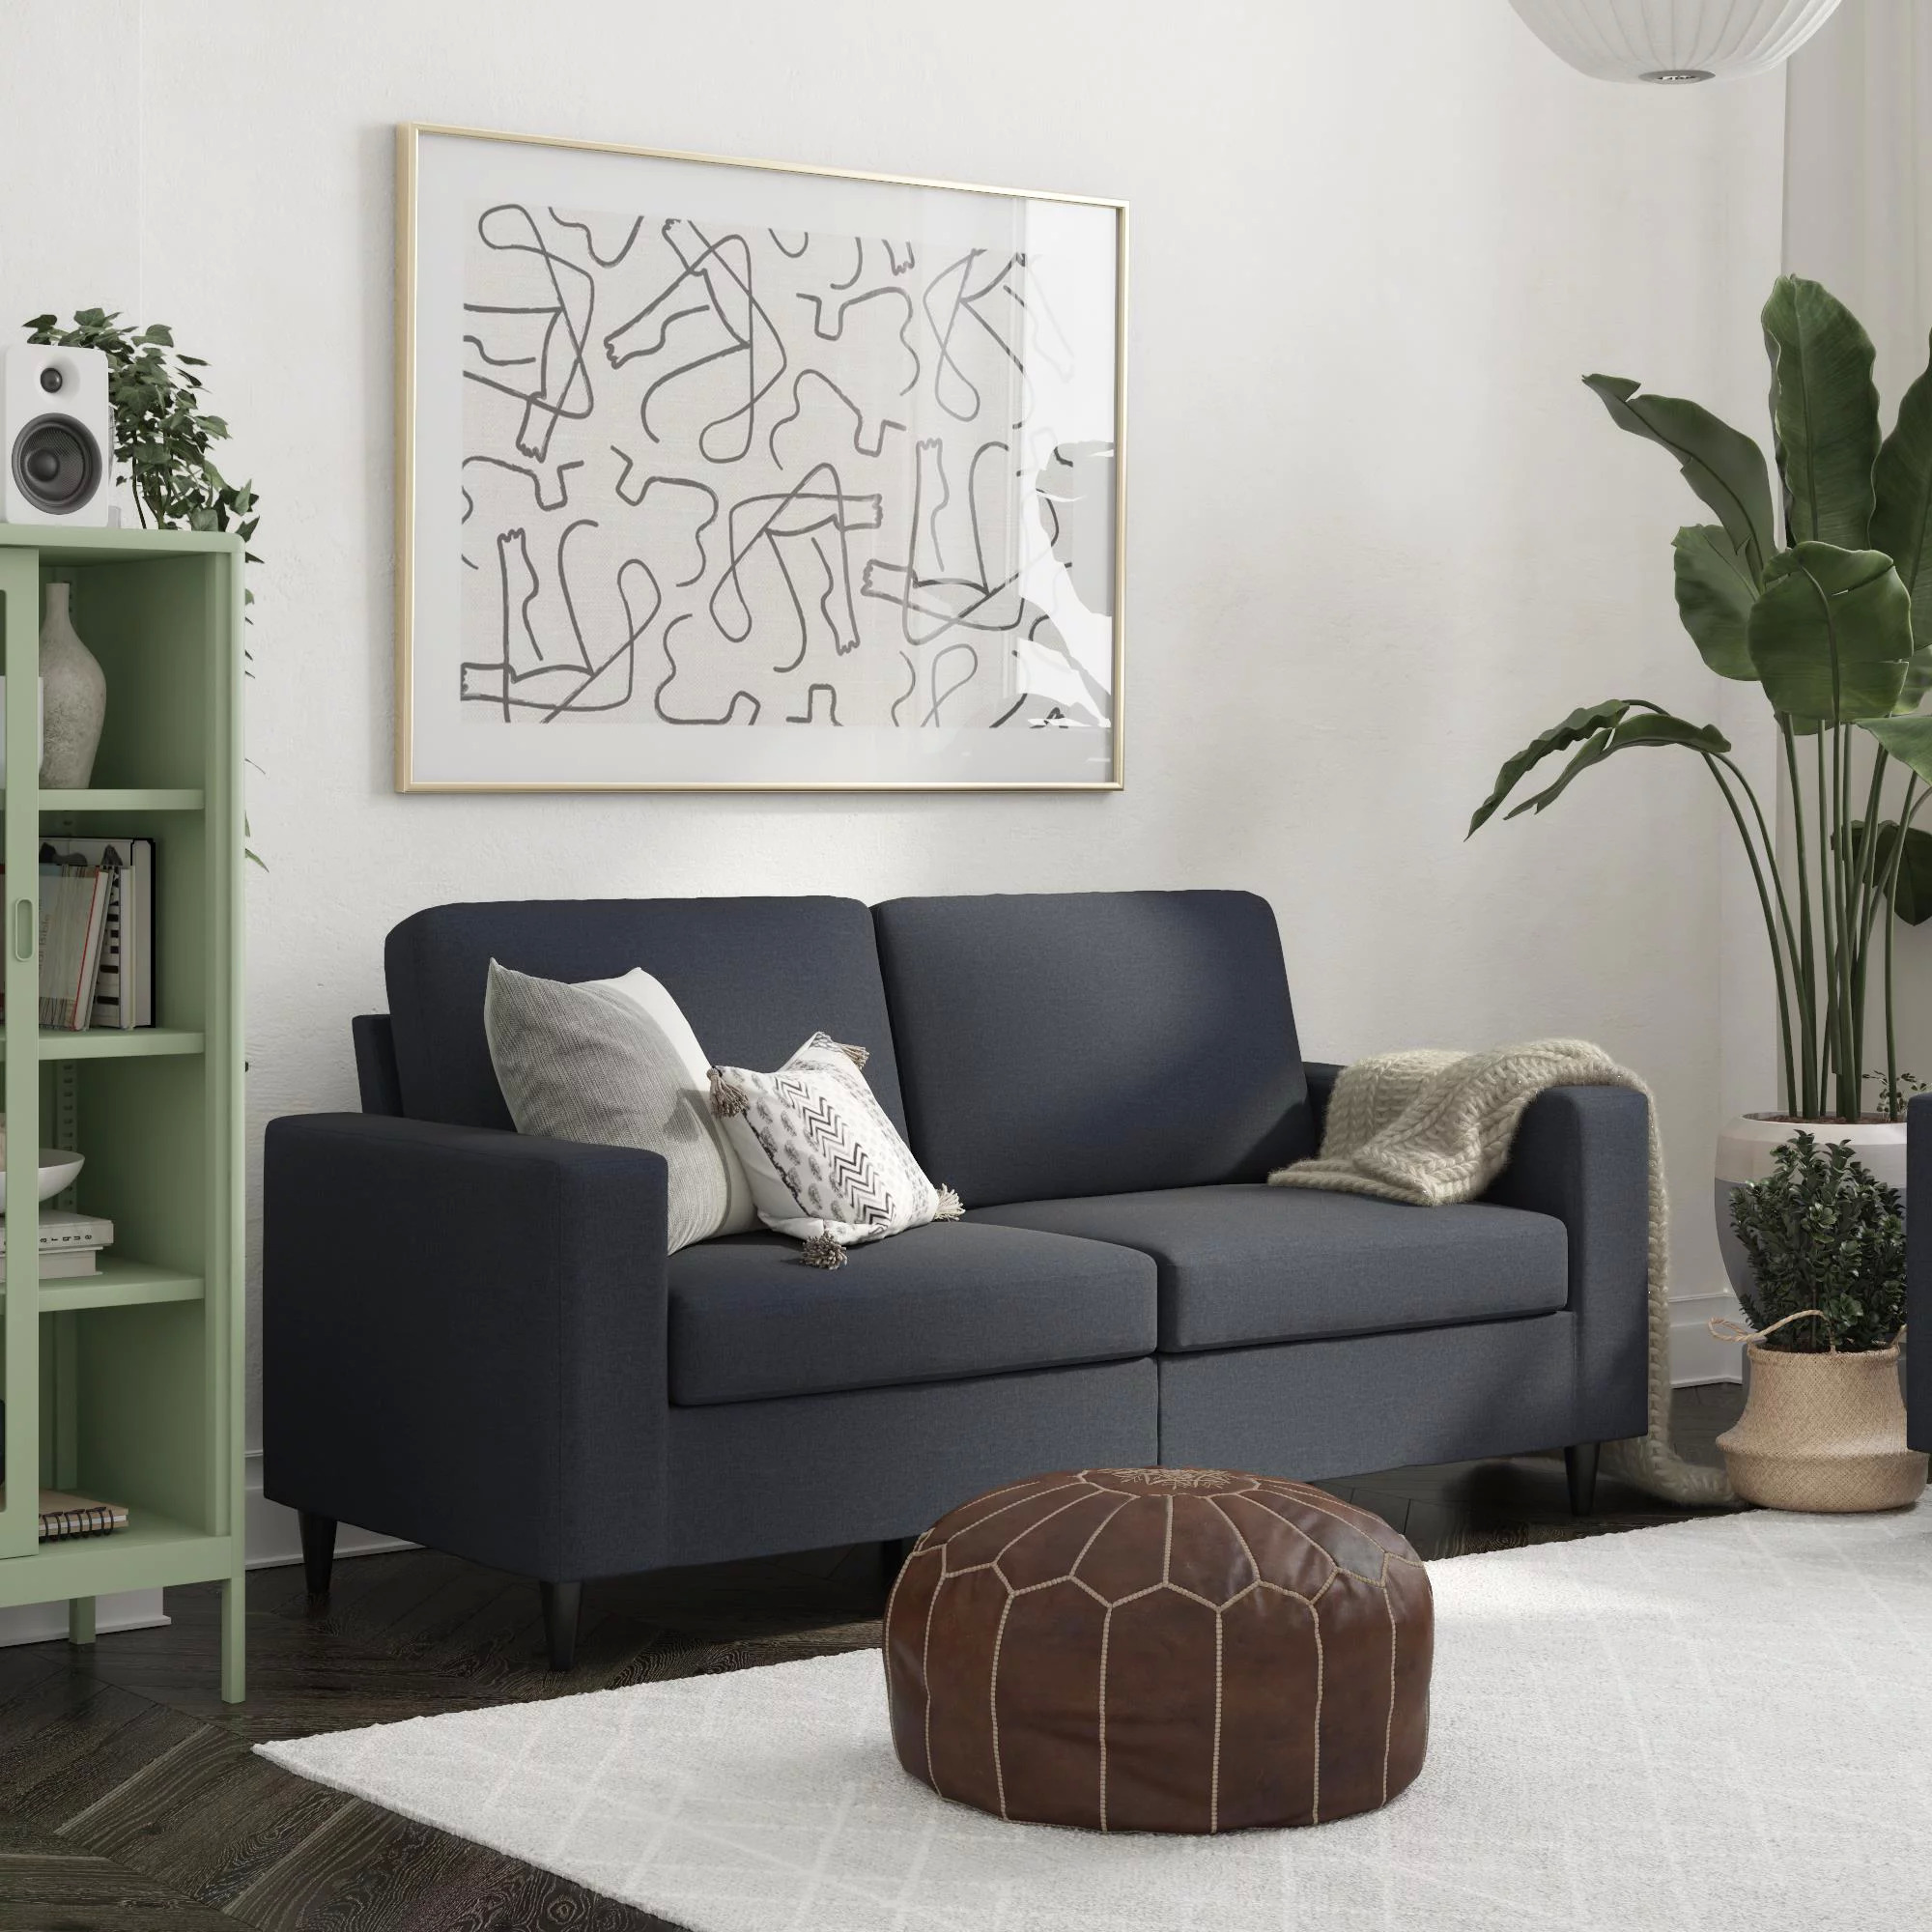 75" DHP Cooper 3-Seater Sofa Couch (Blue Linen or Green Velvet) $198 + Free Shipping